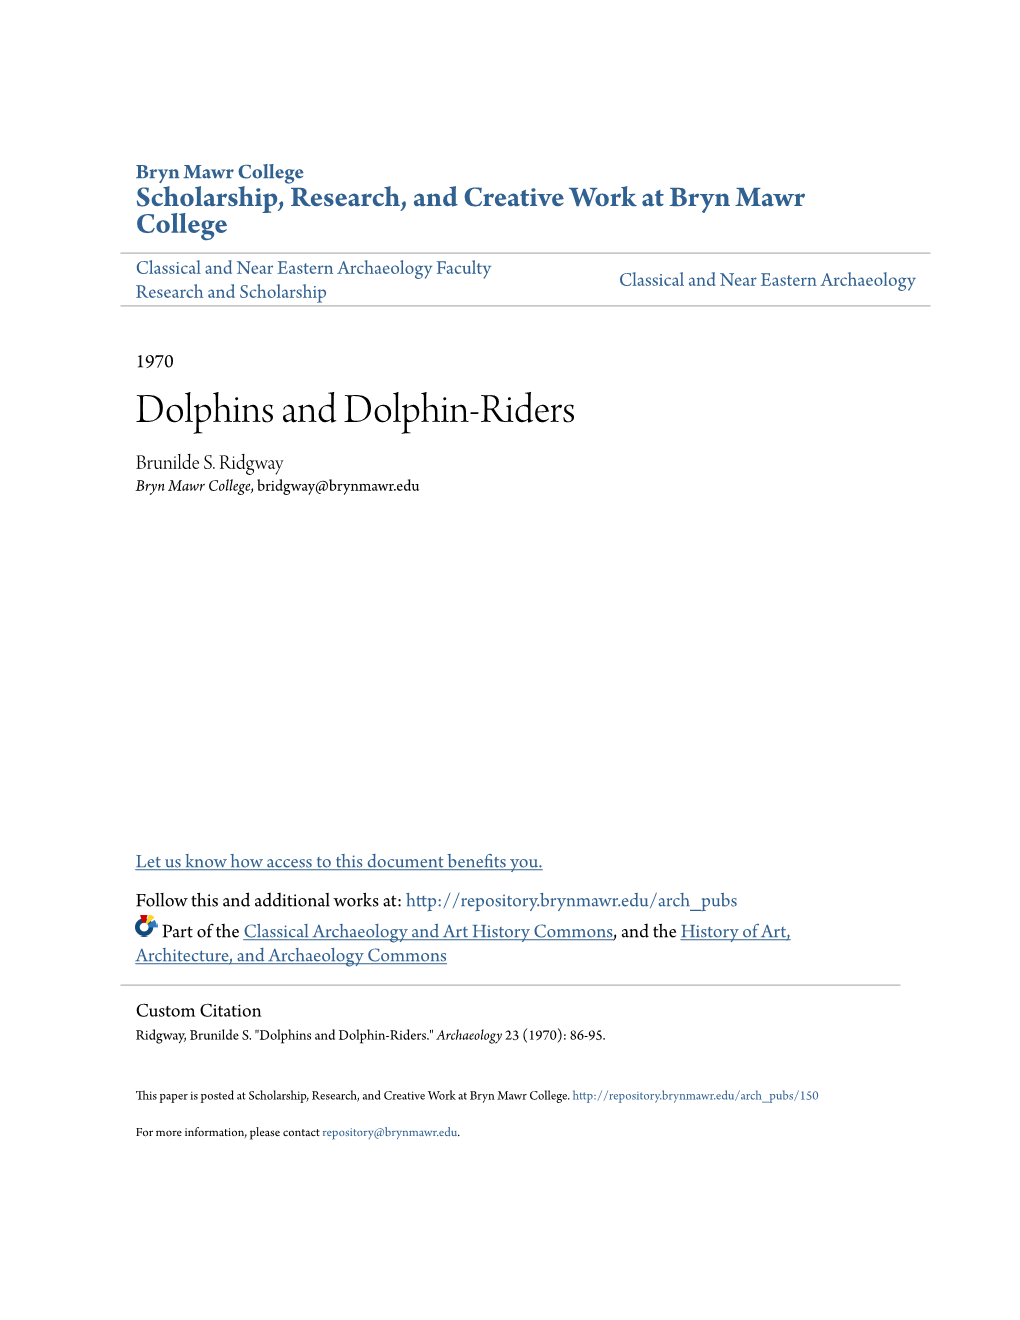 Dolphins and Dolphin-Riders Brunilde S